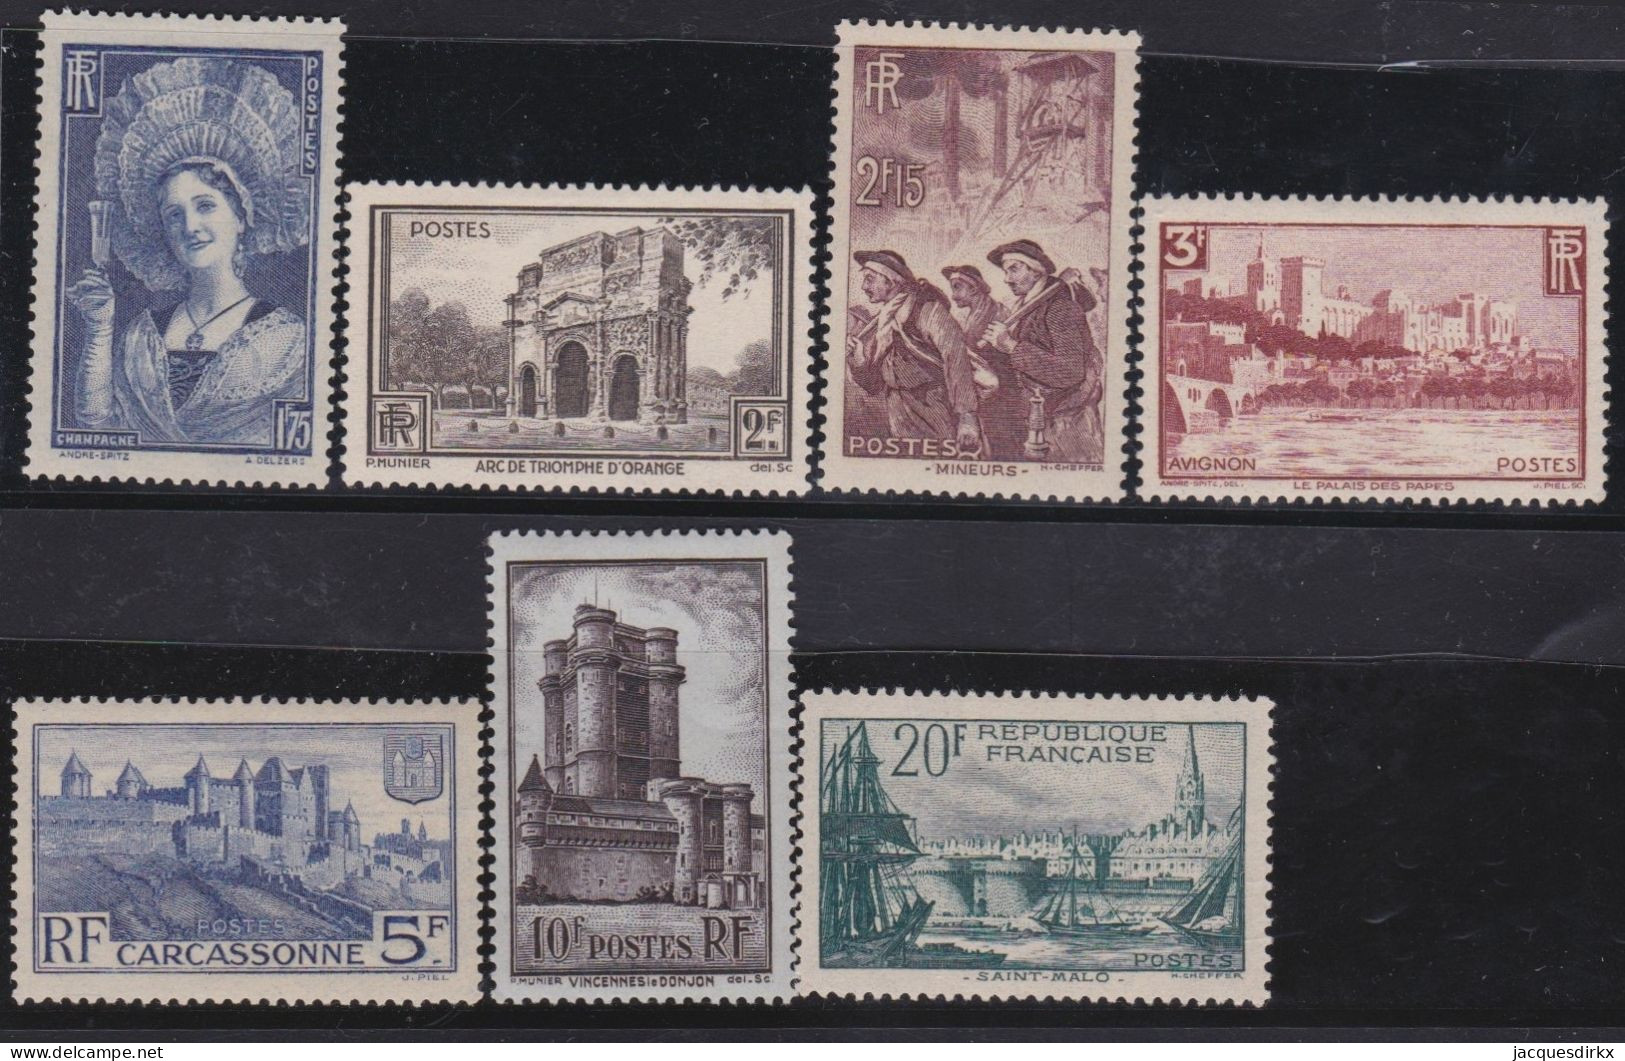 France  .  Y&T   .   388/394   .     *  (388: (*) )    .     Neuf Avec Gomme - Unused Stamps